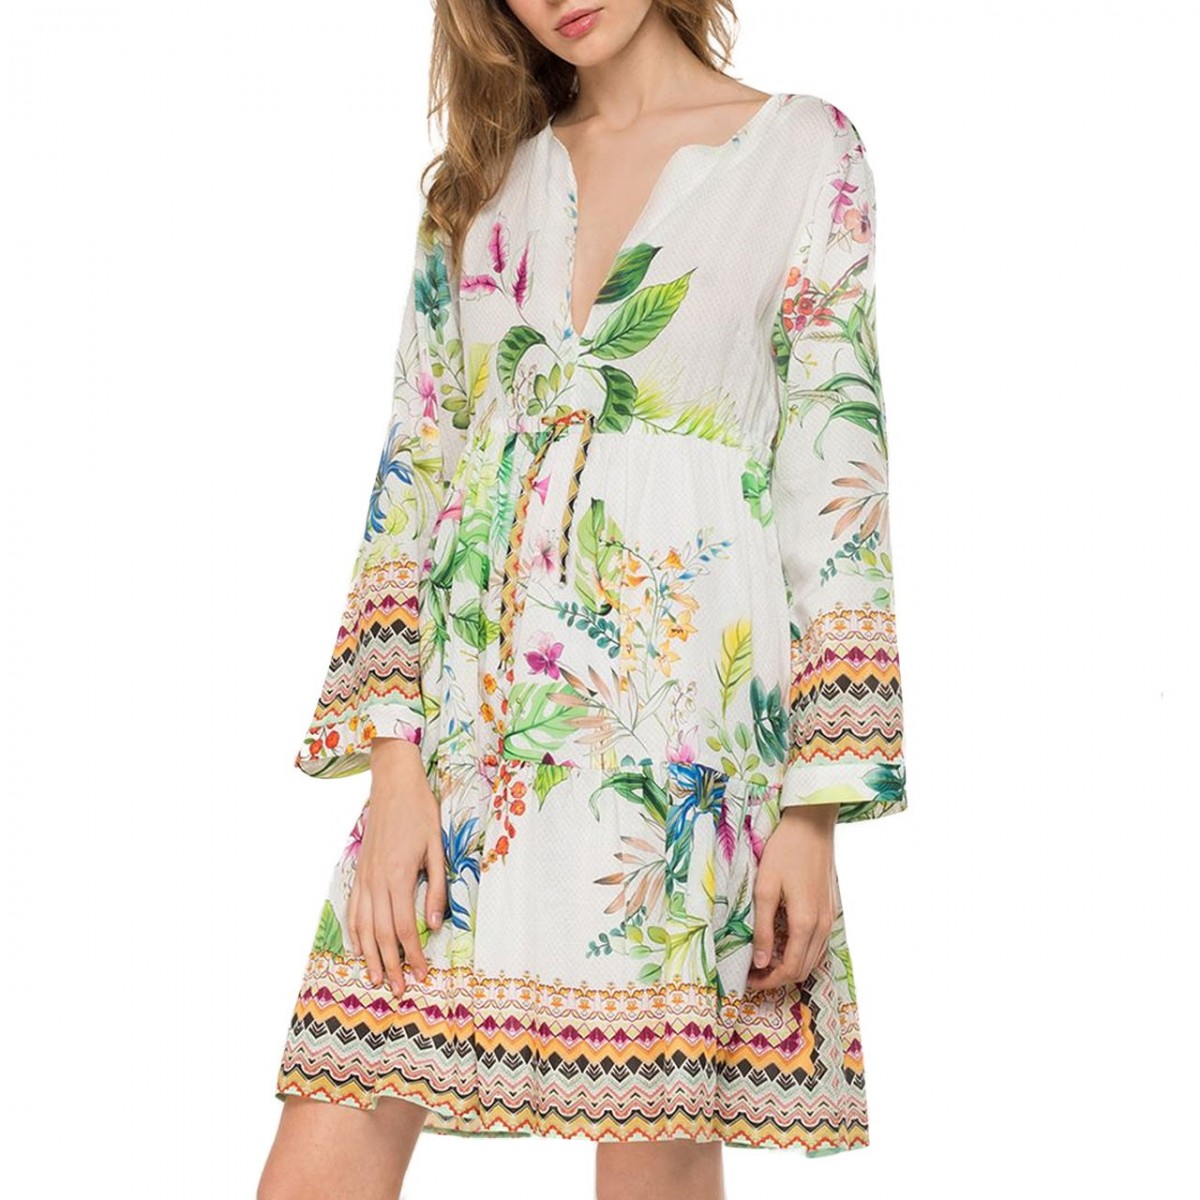 Replay | Dress With Floral Drawstring, White | RPY_W9602 .000.72008 .010